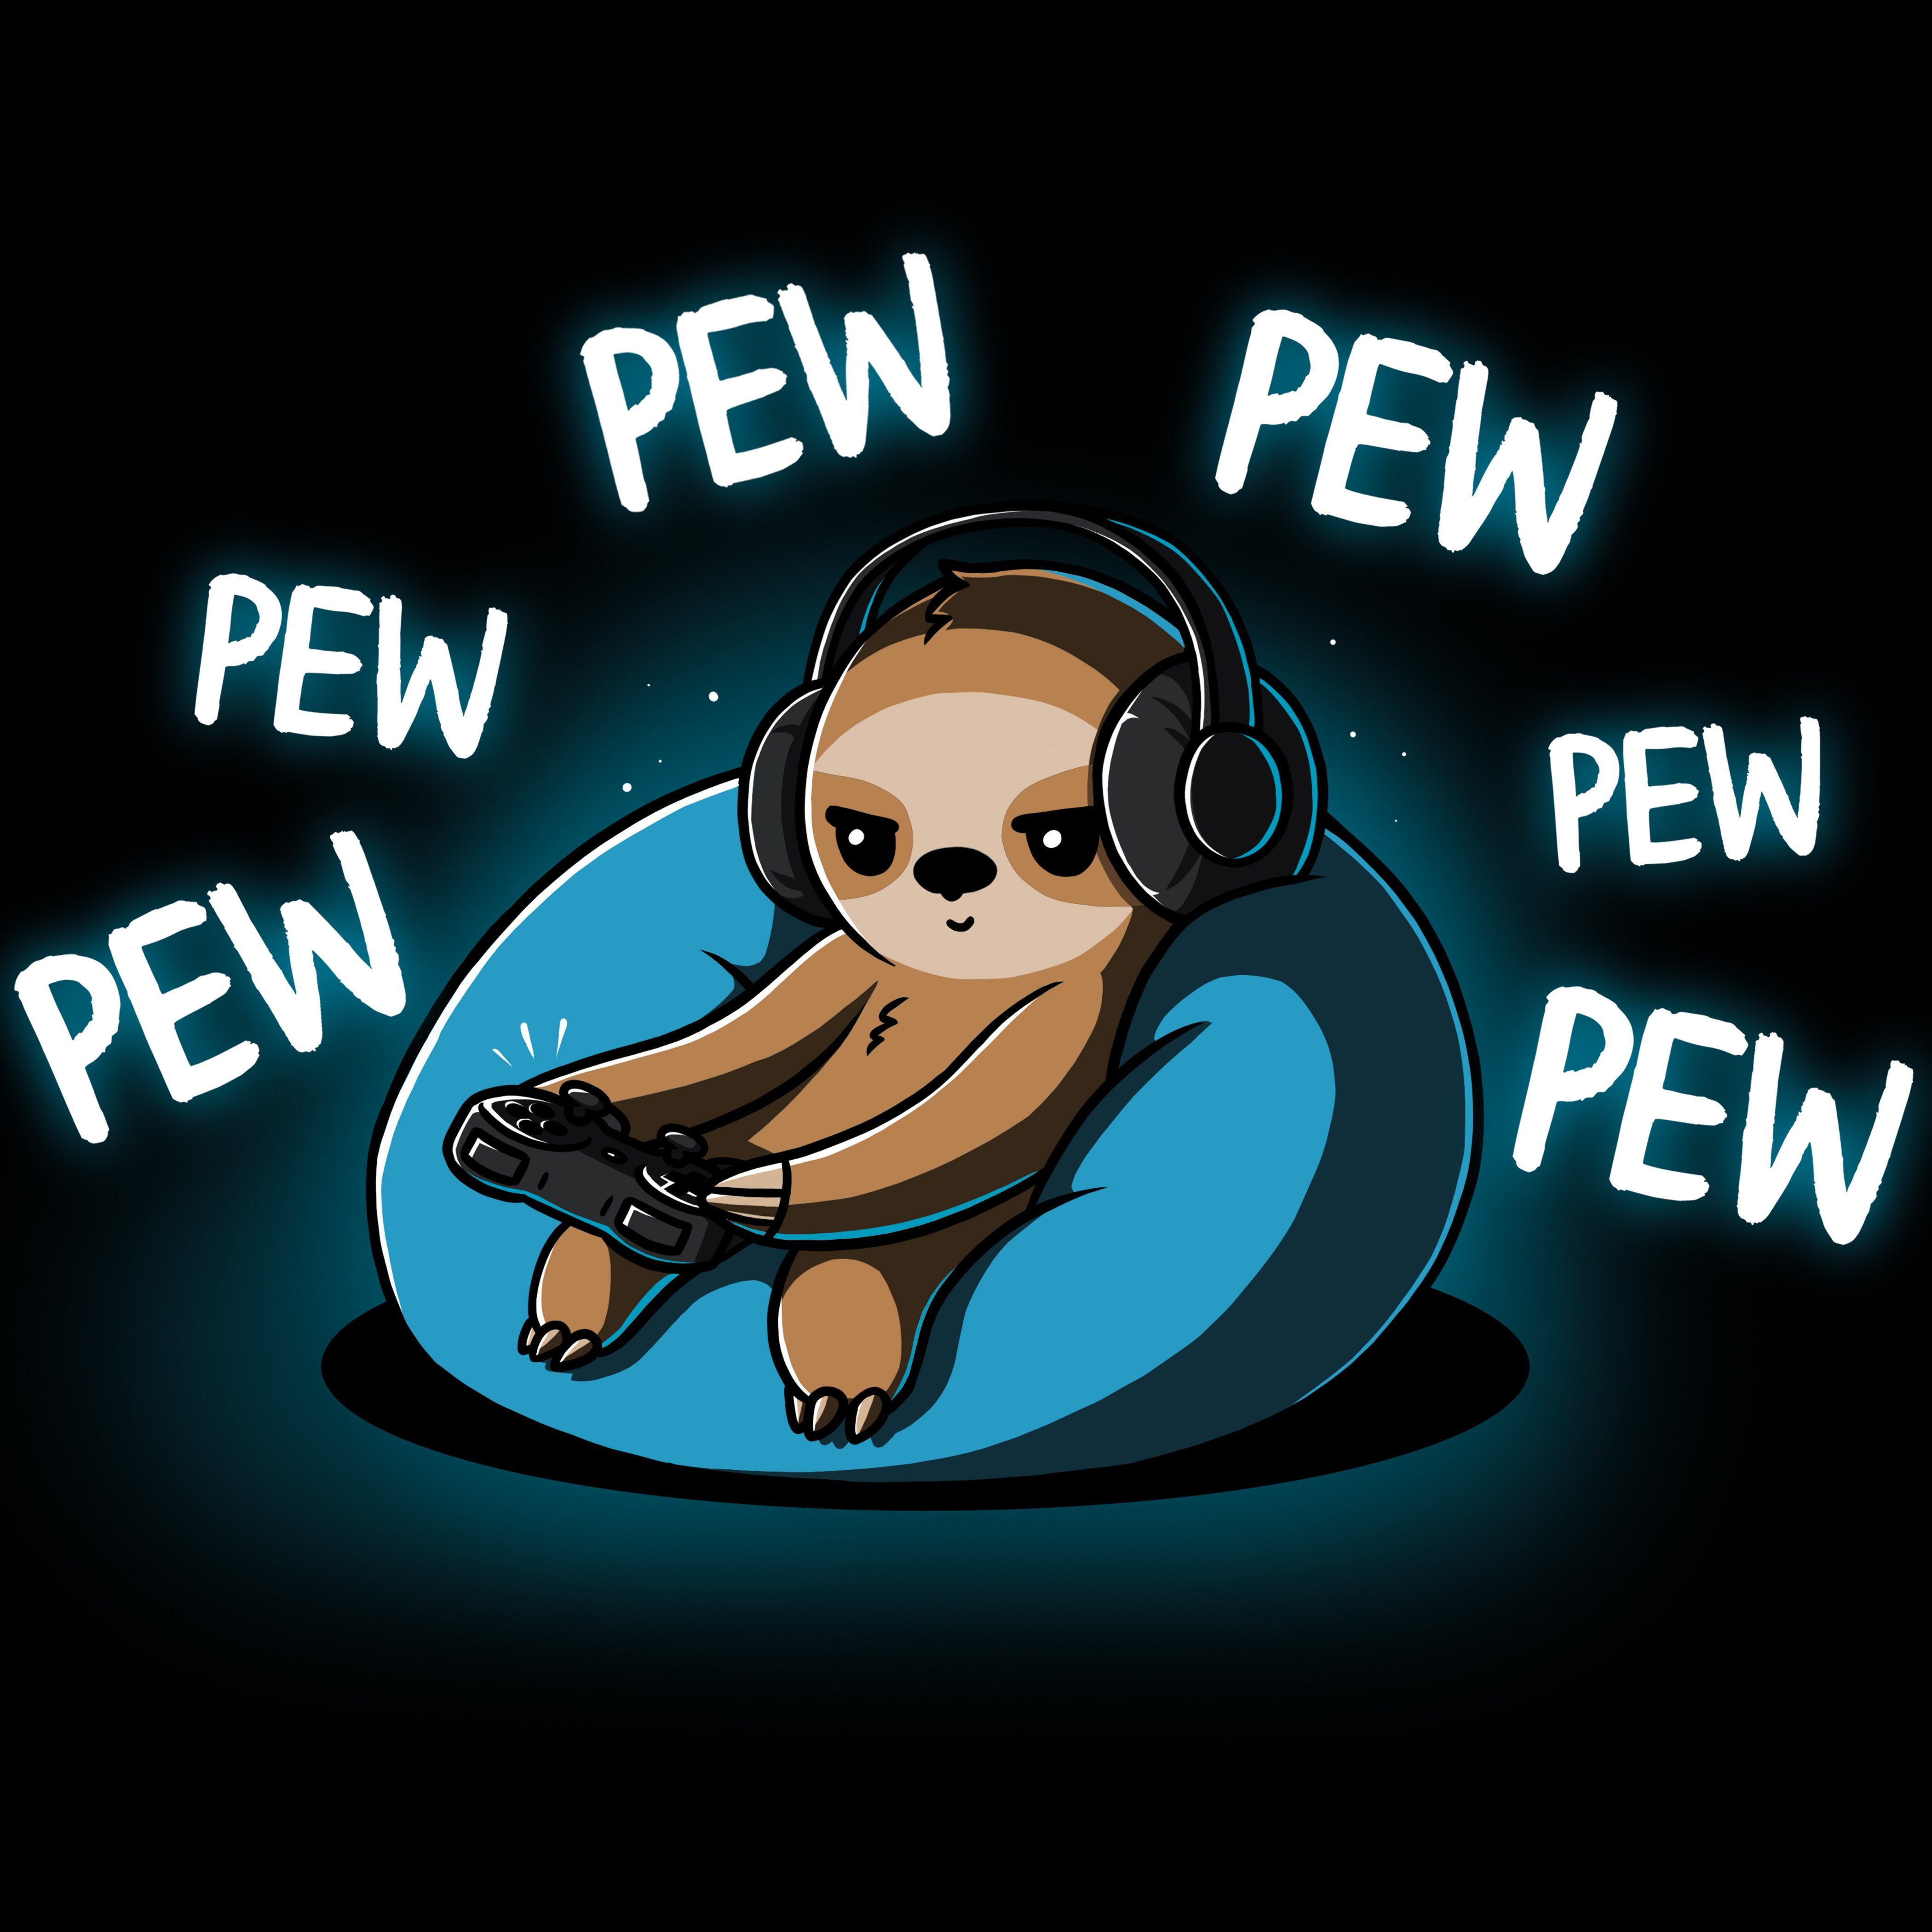 Pew Pew Sloth shirt from Tee Turtle - Daily Shirts